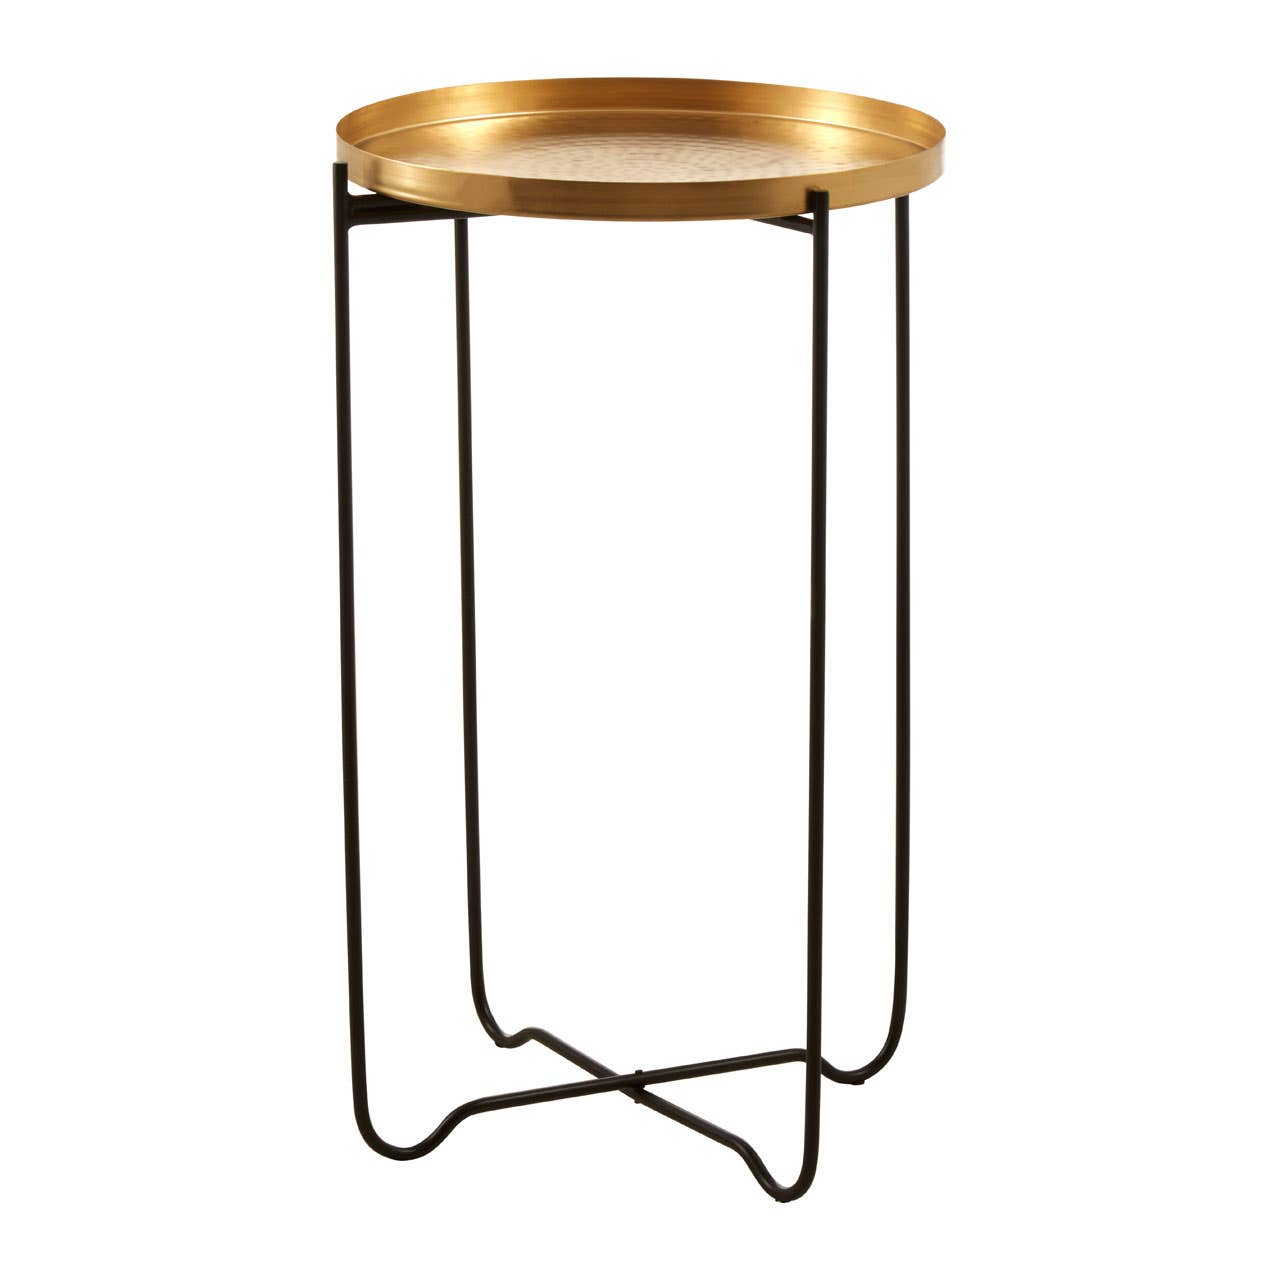 Templar Gold Finish Top Side Table